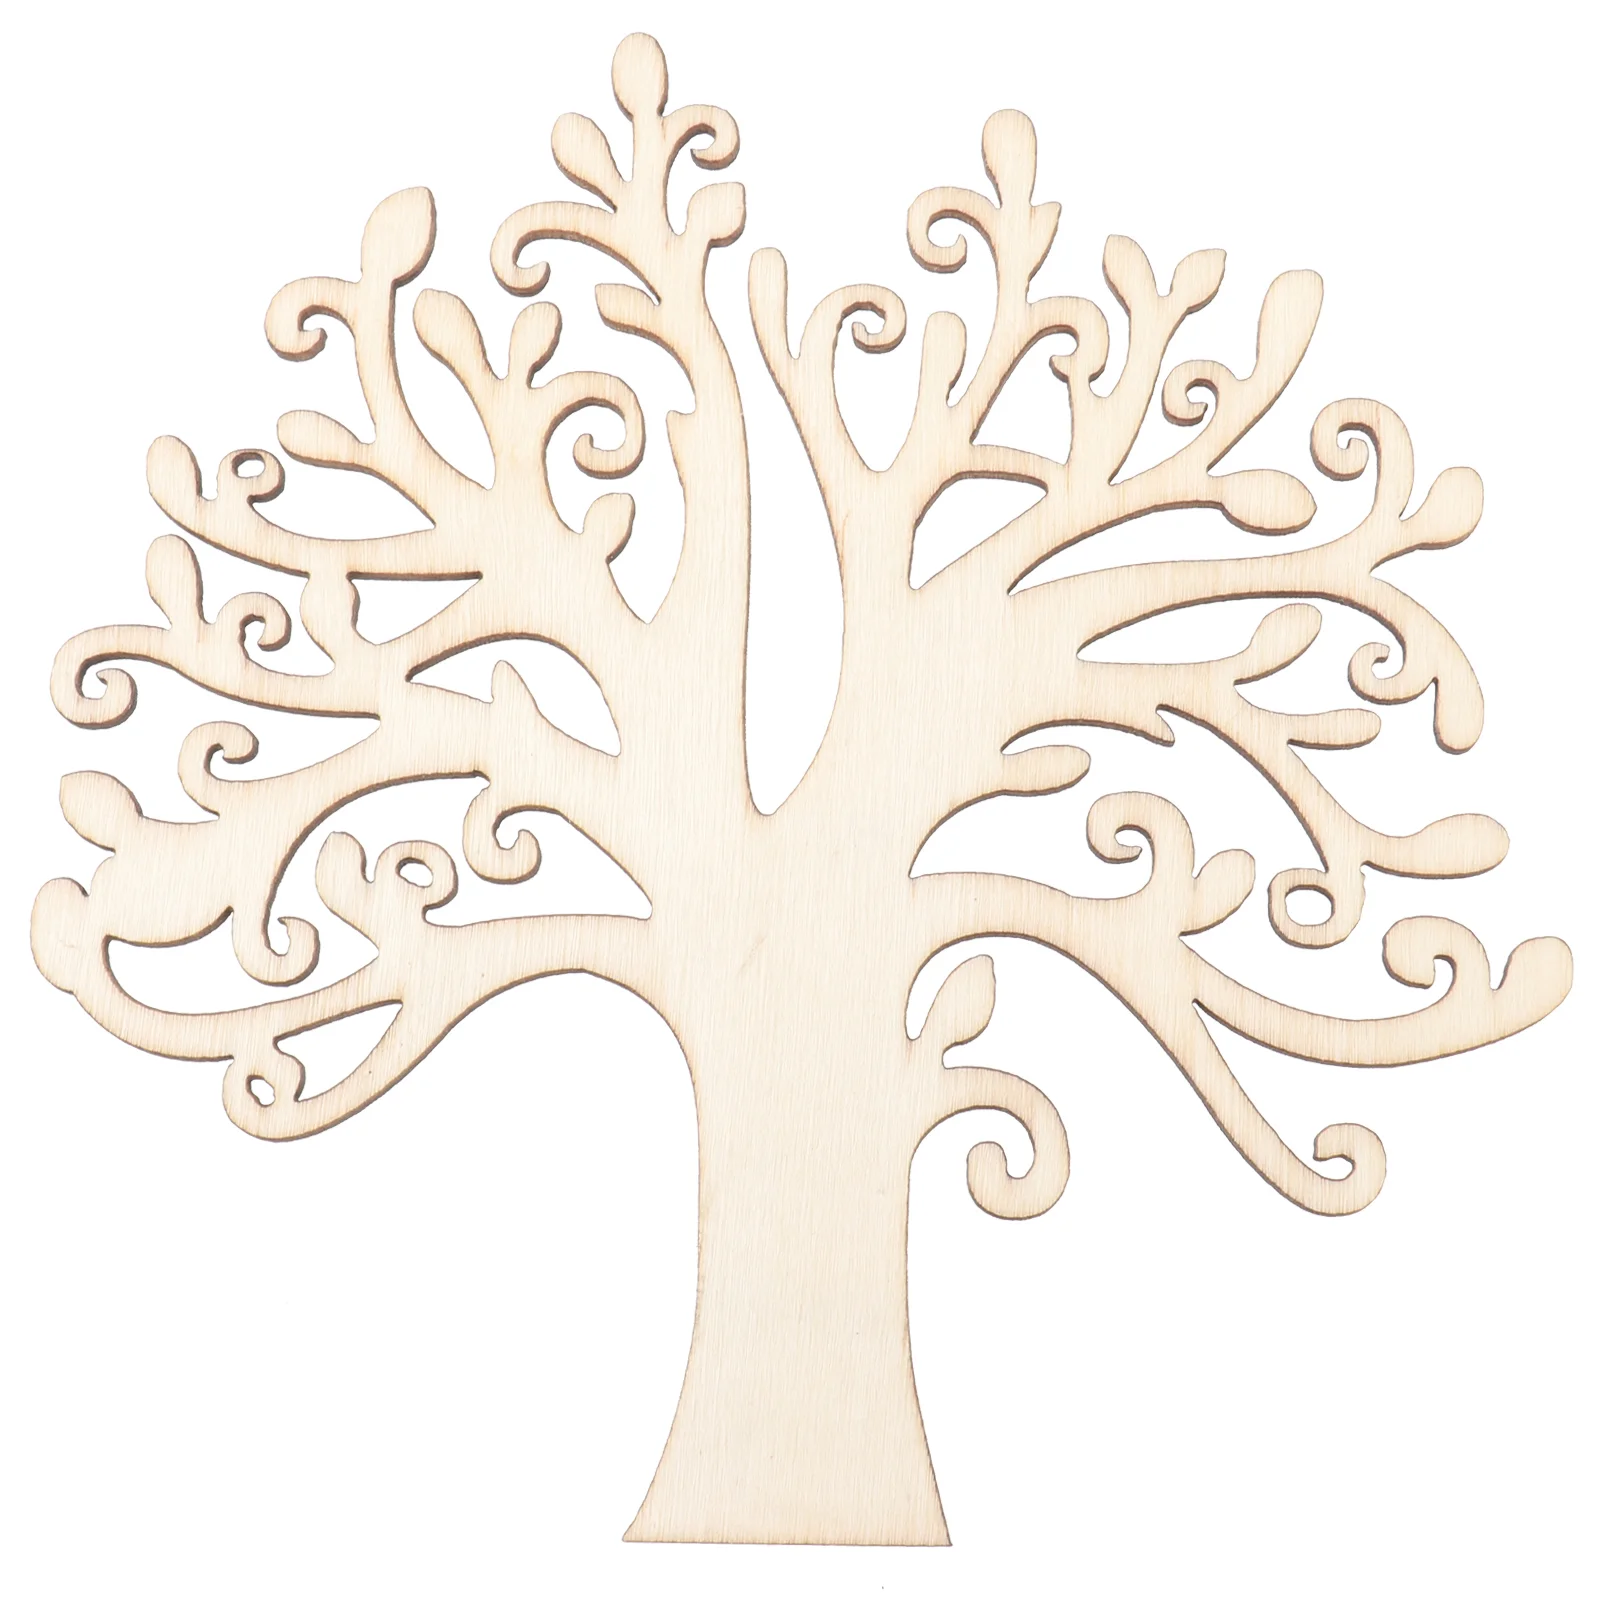 

Tree Wood Wooden Embellishment Crafts Cutout Family Blank Embellishments Unfinished Diy Craft Trees Cutouts Ornament Christmas